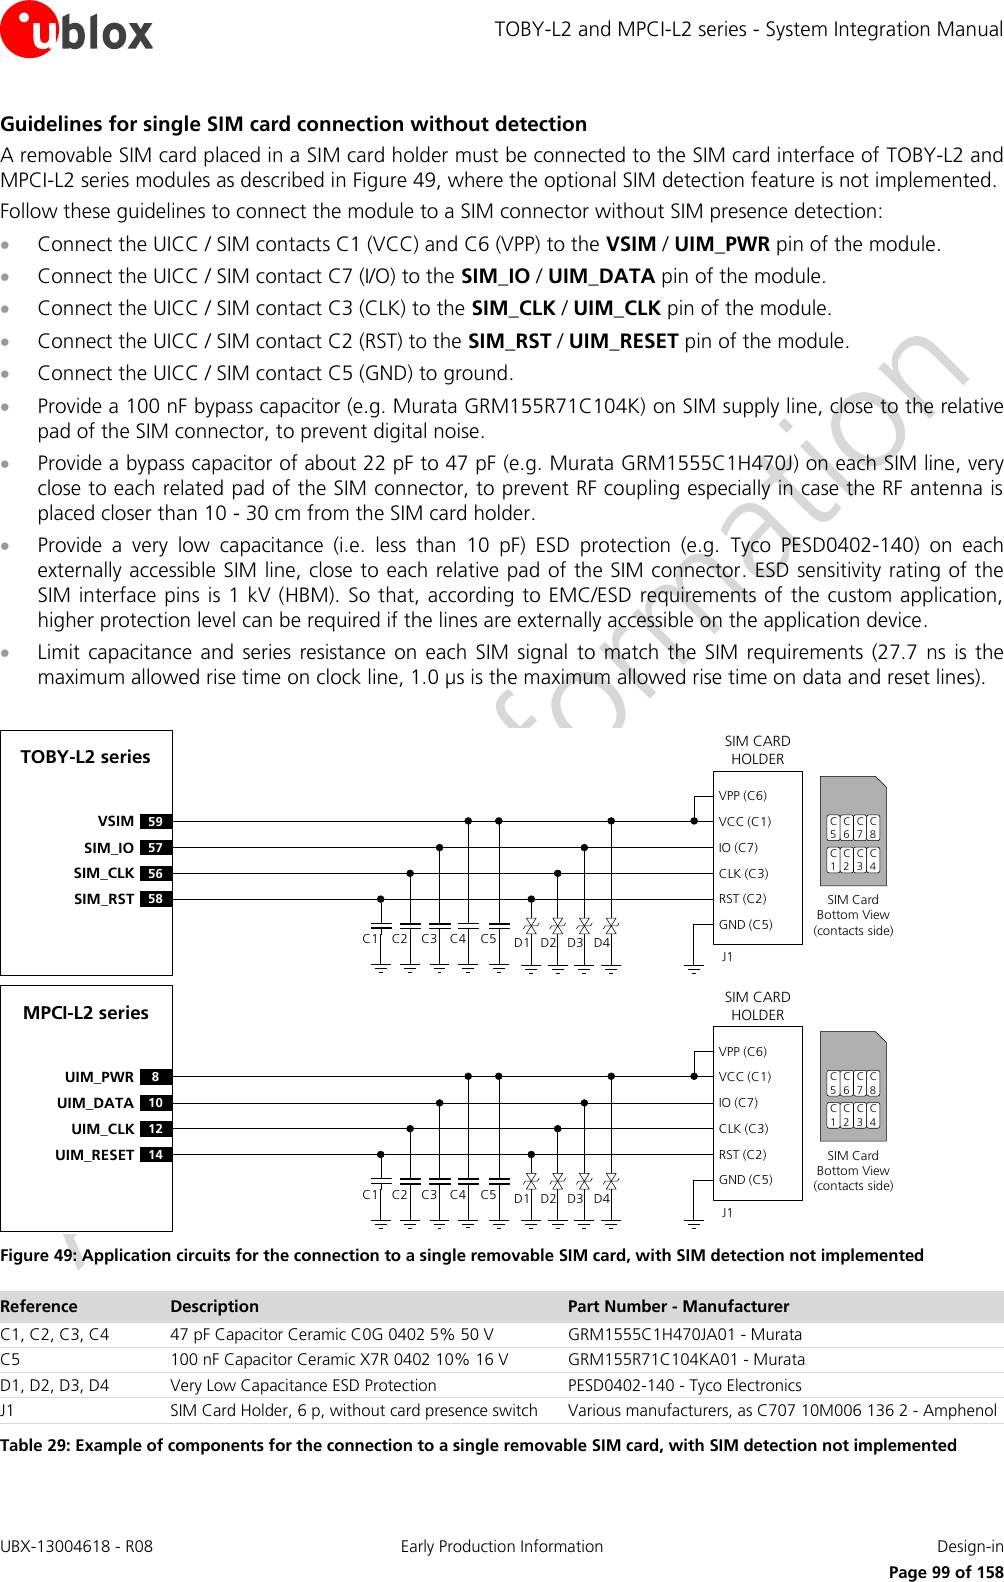 TOBY-L2 and MPCI-L2 series - System Integration Manual UBX-13004618 - R08  Early Production Information  Design-in     Page 99 of 158 Guidelines for single SIM card connection without detection A removable SIM card placed in a SIM card holder must be connected to the SIM card interface of TOBY-L2 and MPCI-L2 series modules as described in Figure 49, where the optional SIM detection feature is not implemented. Follow these guidelines to connect the module to a SIM connector without SIM presence detection:  Connect the UICC / SIM contacts C1 (VCC) and C6 (VPP) to the VSIM / UIM_PWR pin of the module.  Connect the UICC / SIM contact C7 (I/O) to the SIM_IO / UIM_DATA pin of the module.  Connect the UICC / SIM contact C3 (CLK) to the SIM_CLK / UIM_CLK pin of the module.  Connect the UICC / SIM contact C2 (RST) to the SIM_RST / UIM_RESET pin of the module.  Connect the UICC / SIM contact C5 (GND) to ground.  Provide a 100 nF bypass capacitor (e.g. Murata GRM155R71C104K) on SIM supply line, close to the relative pad of the SIM connector, to prevent digital noise.  Provide a bypass capacitor of about 22 pF to 47 pF (e.g. Murata GRM1555C1H470J) on each SIM line, very close to each related pad of the SIM connector, to prevent RF coupling especially in case the RF antenna is placed closer than 10 - 30 cm from the SIM card holder.  Provide  a  very  low  capacitance  (i.e.  less  than  10  pF)  ESD  protection  (e.g.  Tyco  PESD0402-140)  on  each externally accessible SIM line, close to each relative pad of the SIM connector. ESD sensitivity rating of the SIM interface pins is 1 kV (HBM). So that, according to EMC/ESD requirements of the custom application, higher protection level can be required if the lines are externally accessible on the application device.  Limit capacitance  and  series  resistance  on each  SIM  signal to  match  the  SIM requirements  (27.7  ns  is the maximum allowed rise time on clock line, 1.0 µs is the maximum allowed rise time on data and reset lines).  TOBY-L2 series59VSIM57SIM_IO56SIM_CLK58SIM_RSTSIM CARD HOLDERC5C6C7C1C2C3SIM Card Bottom View (contacts side)C1VPP (C6)VCC (C1)IO (C7)CLK (C3)RST (C2)GND (C5)C2 C3 C5J1C4 D1 D2 D3 D4C8C4MPCI-L2 series8UIM_PWR10UIM_DATA12UIM_CLK14UIM_RESETSIM CARD HOLDERC5C6C7C1C2C3SIM Card Bottom View (contacts side)C1VPP (C6)VCC (C1)IO (C7)CLK (C3)RST (C2)GND (C5)C2 C3 C5J1C4 D1 D2 D3 D4C8C4 Figure 49: Application circuits for the connection to a single removable SIM card, with SIM detection not implemented Reference Description Part Number - Manufacturer C1, C2, C3, C4 47 pF Capacitor Ceramic C0G 0402 5% 50 V GRM1555C1H470JA01 - Murata C5 100 nF Capacitor Ceramic X7R 0402 10% 16 V GRM155R71C104KA01 - Murata D1, D2, D3, D4 Very Low Capacitance ESD Protection PESD0402-140 - Tyco Electronics  J1 SIM Card Holder, 6 p, without card presence switch Various manufacturers, as C707 10M006 136 2 - Amphenol Table 29: Example of components for the connection to a single removable SIM card, with SIM detection not implemented 